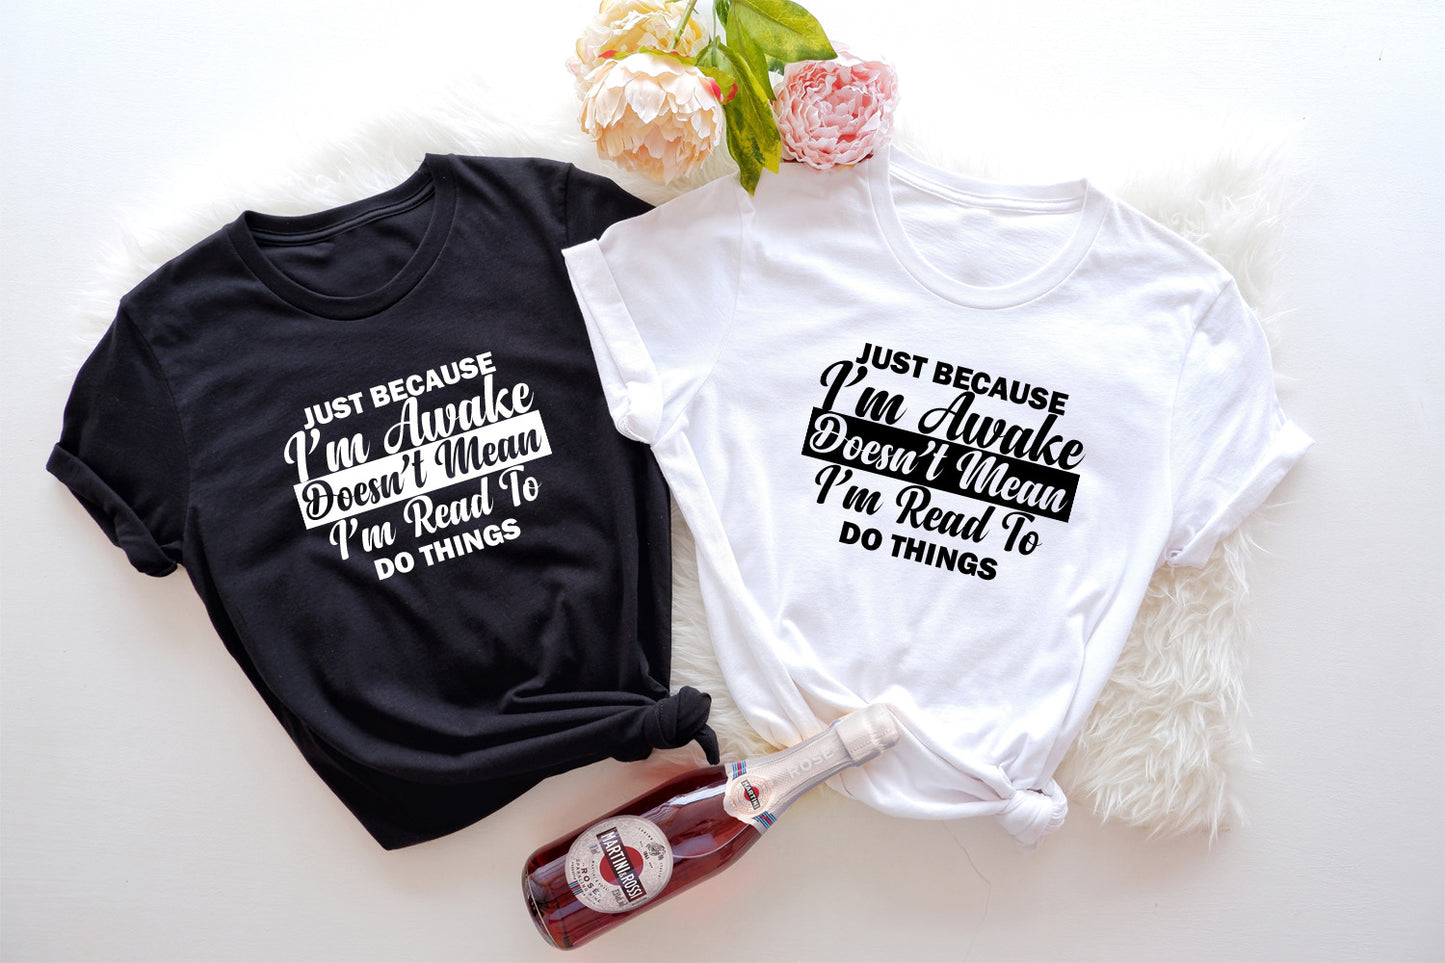 "Just Because I'm Awake Doesn't Mean I'm Ready to Talk" T-Shirt  For the introvert, the morning person who needs some coffee first, or anyone who just needs a little peace and quiet.